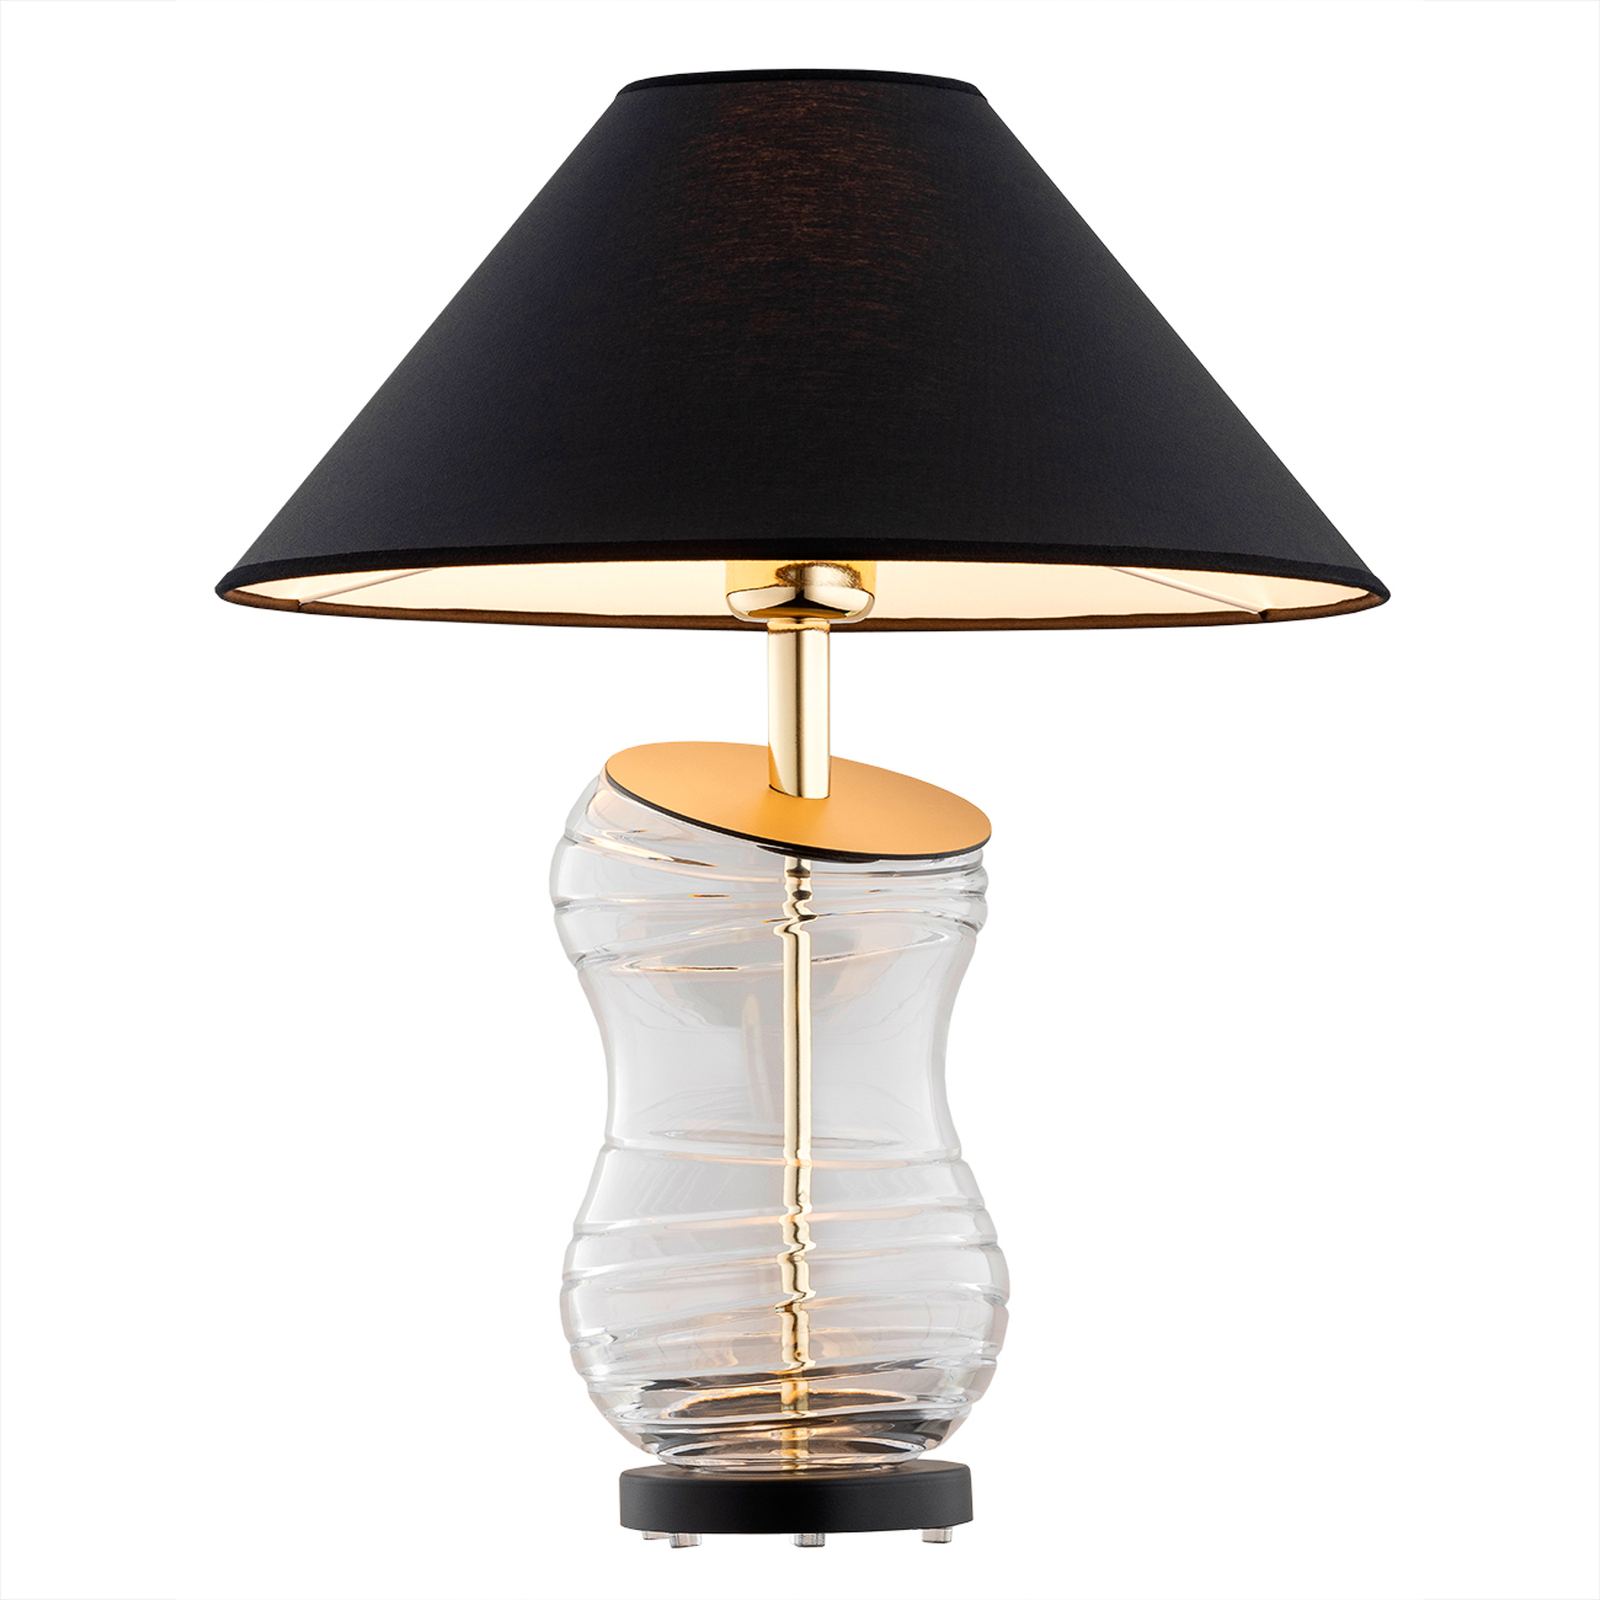 Veneto table lamp with textile shade in black